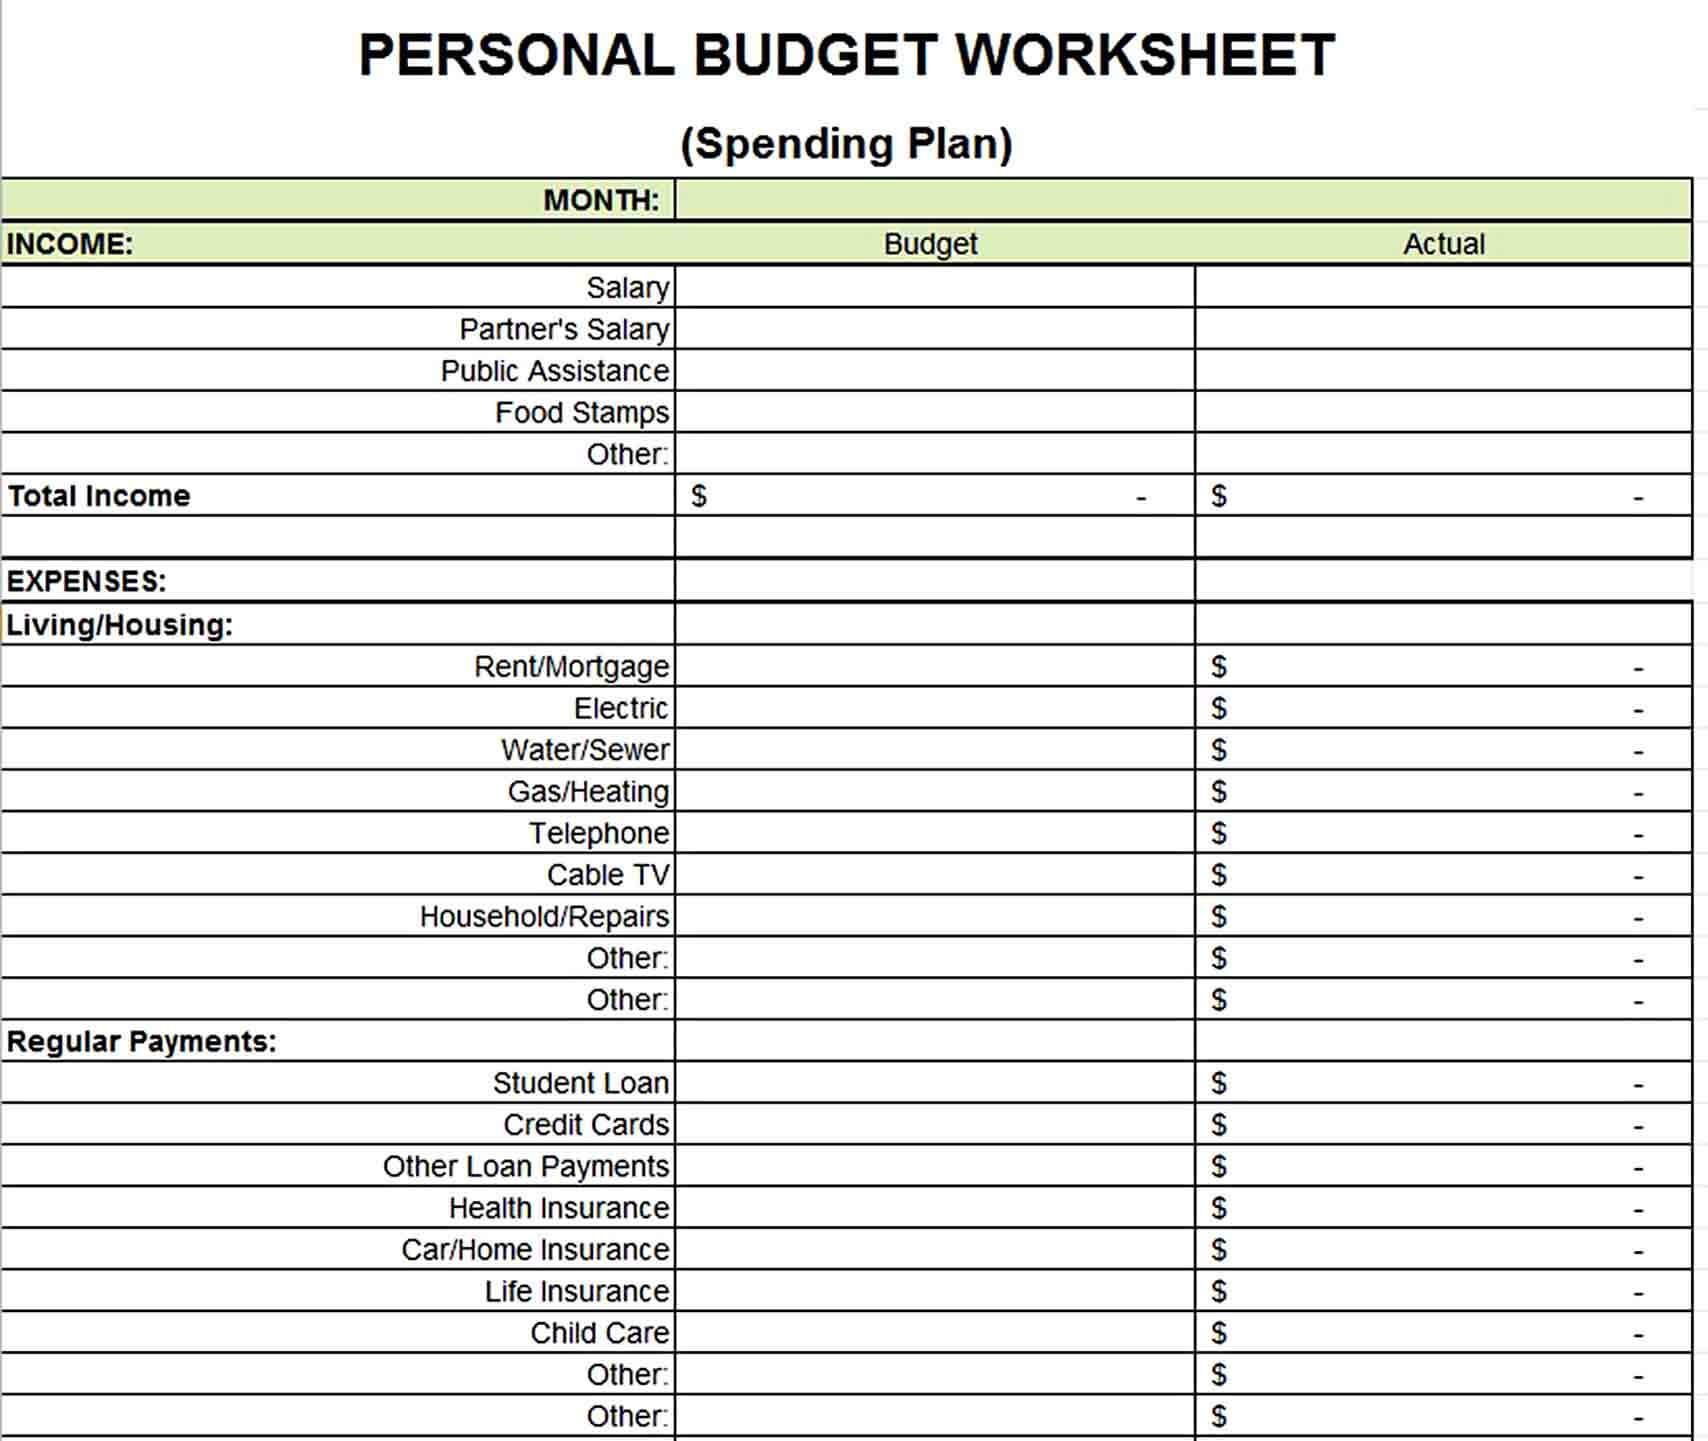 Personal Budget Weekly Expenses Worksheet Template in Excel